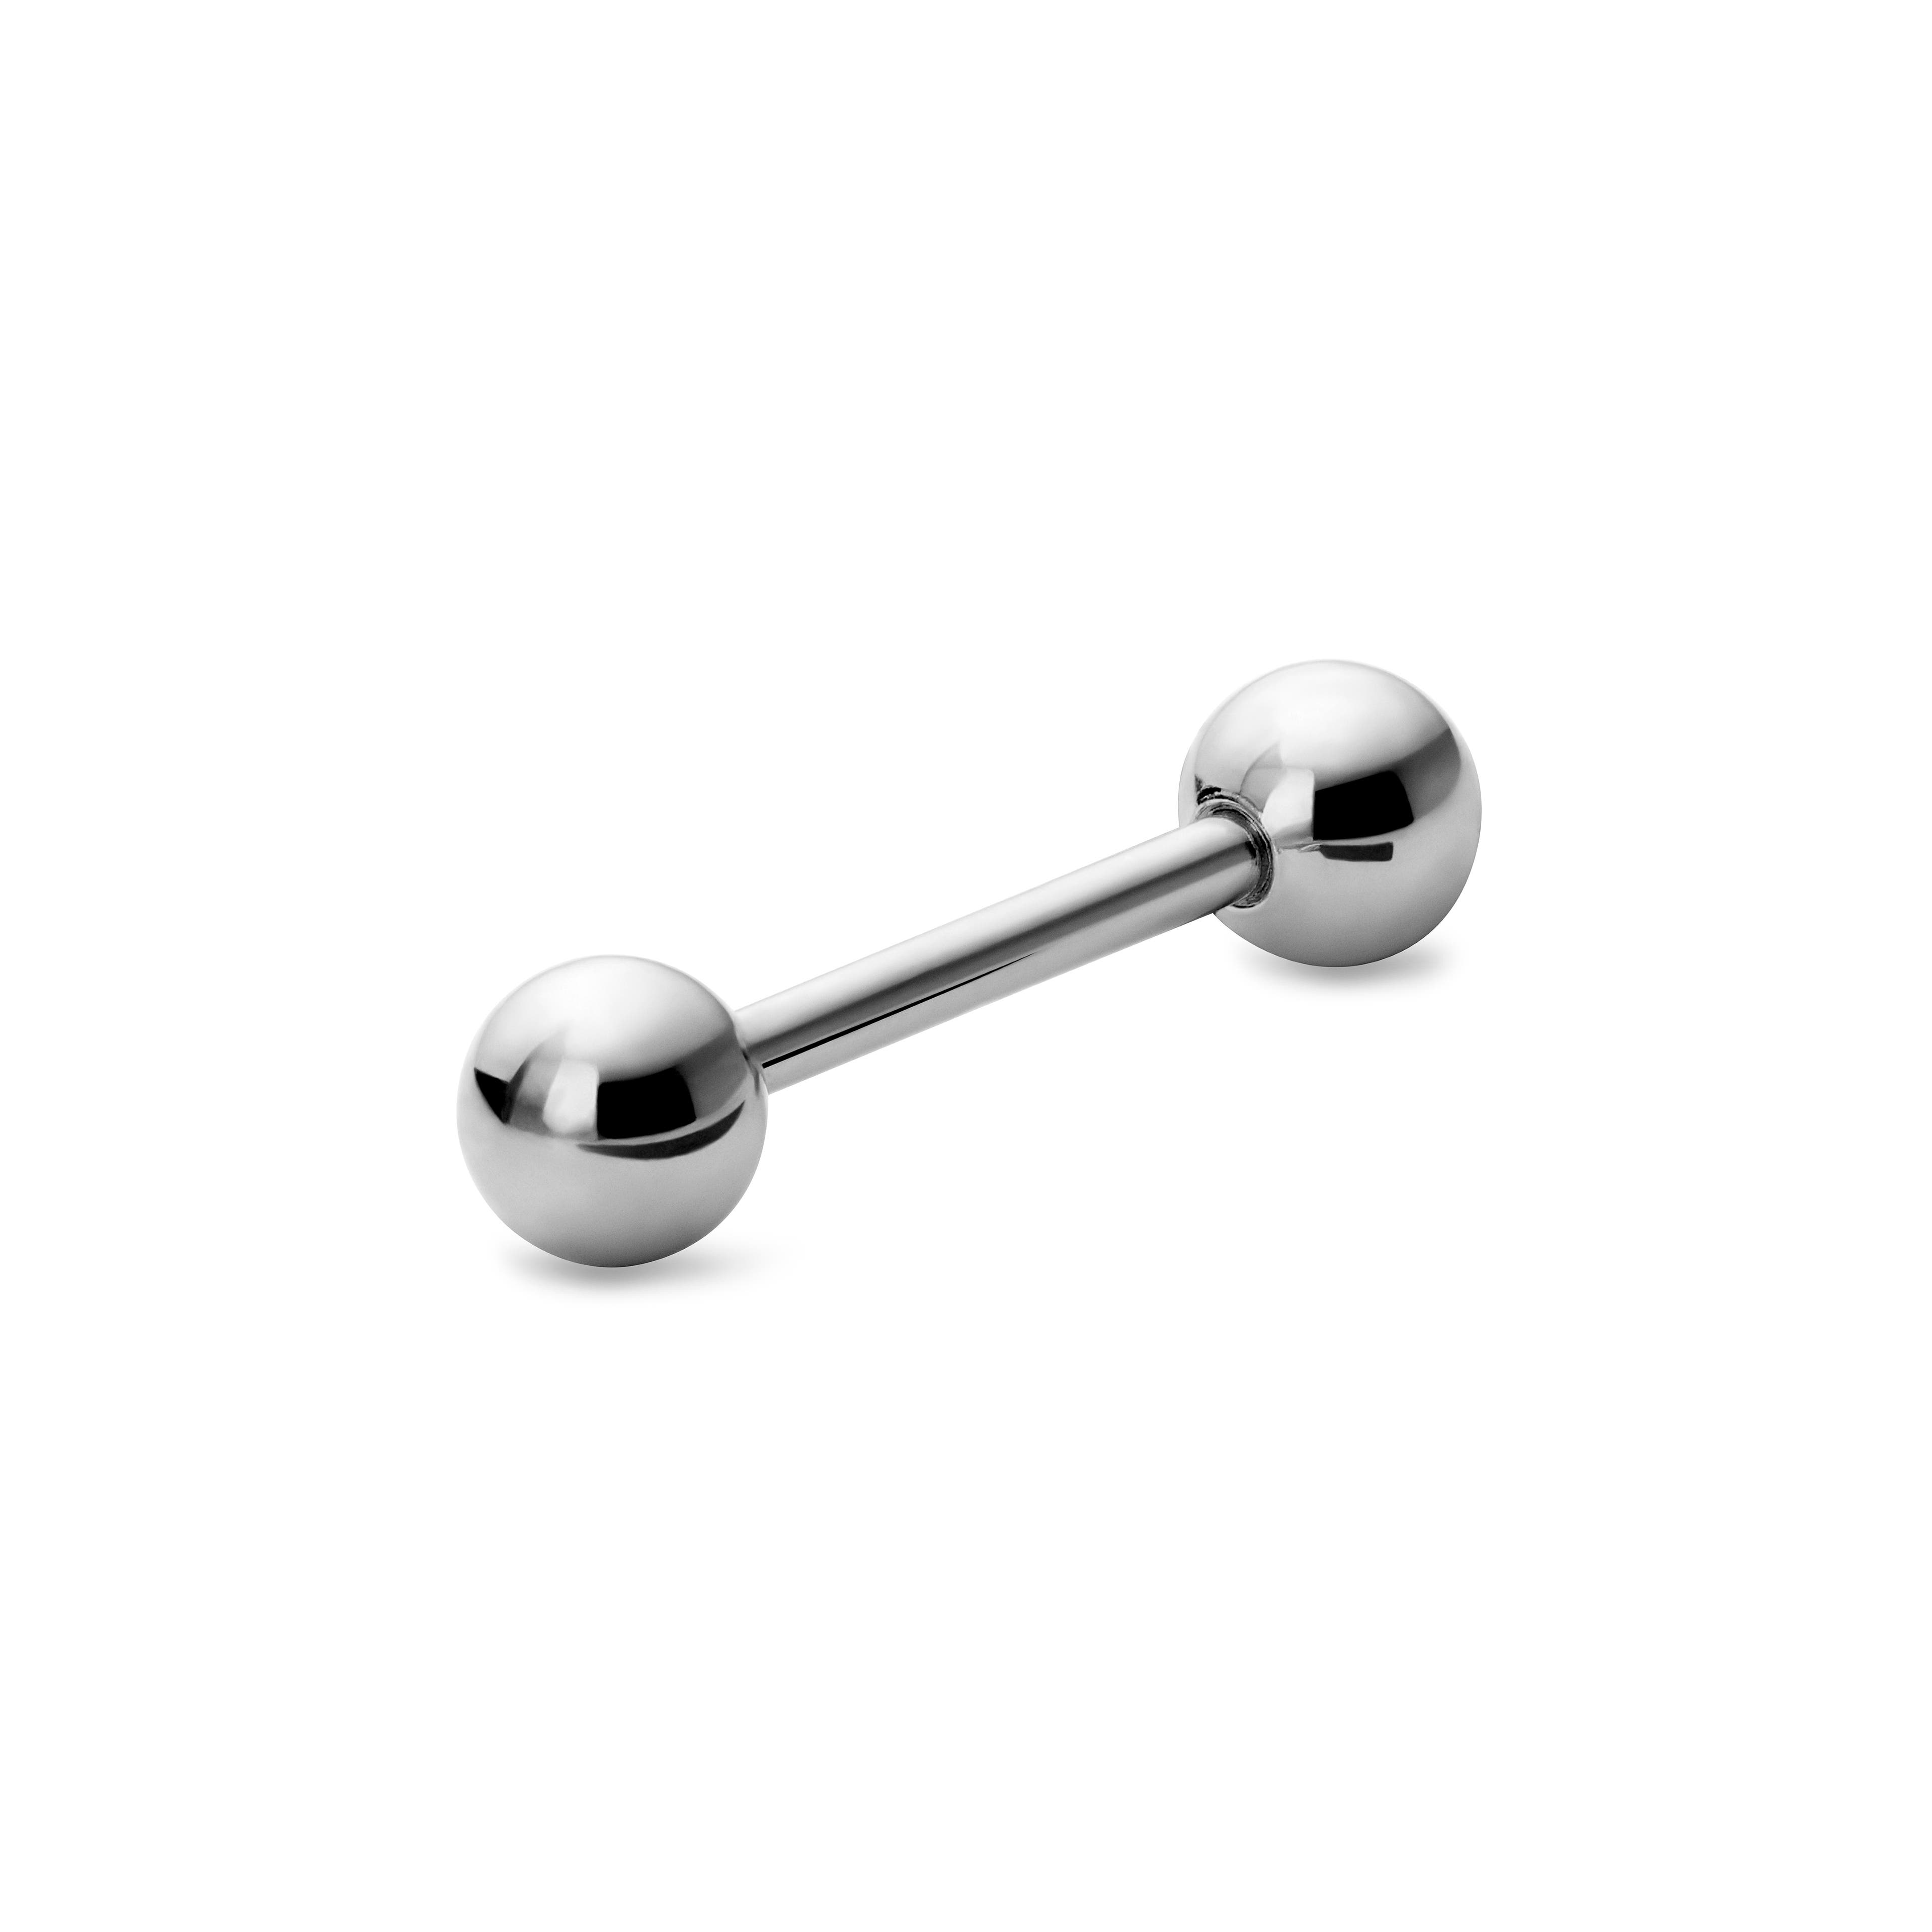 6 mm Silver-Tone Straight Ball-Tipped Titanium Barbell